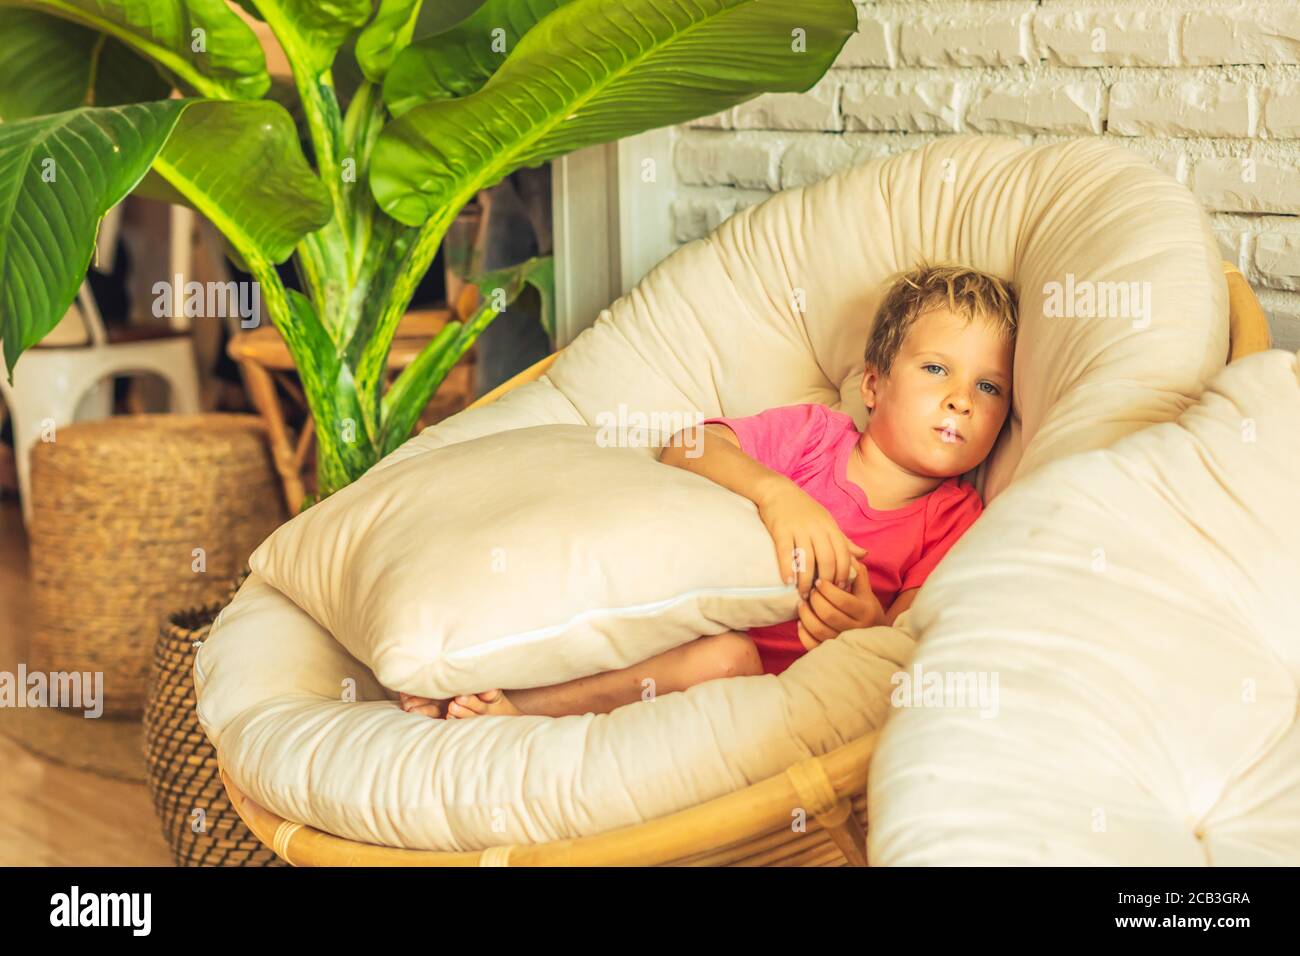 https://c8.alamy.com/comp/2CB3GRA/blond-pouting-offended-upset-or-scare-boy-in-pink-tshirt-tucked-knees-sit-under-pillow-in-a-round-fashionable-chair-in-living-room-in-a-house-indoor-2CB3GRA.jpg